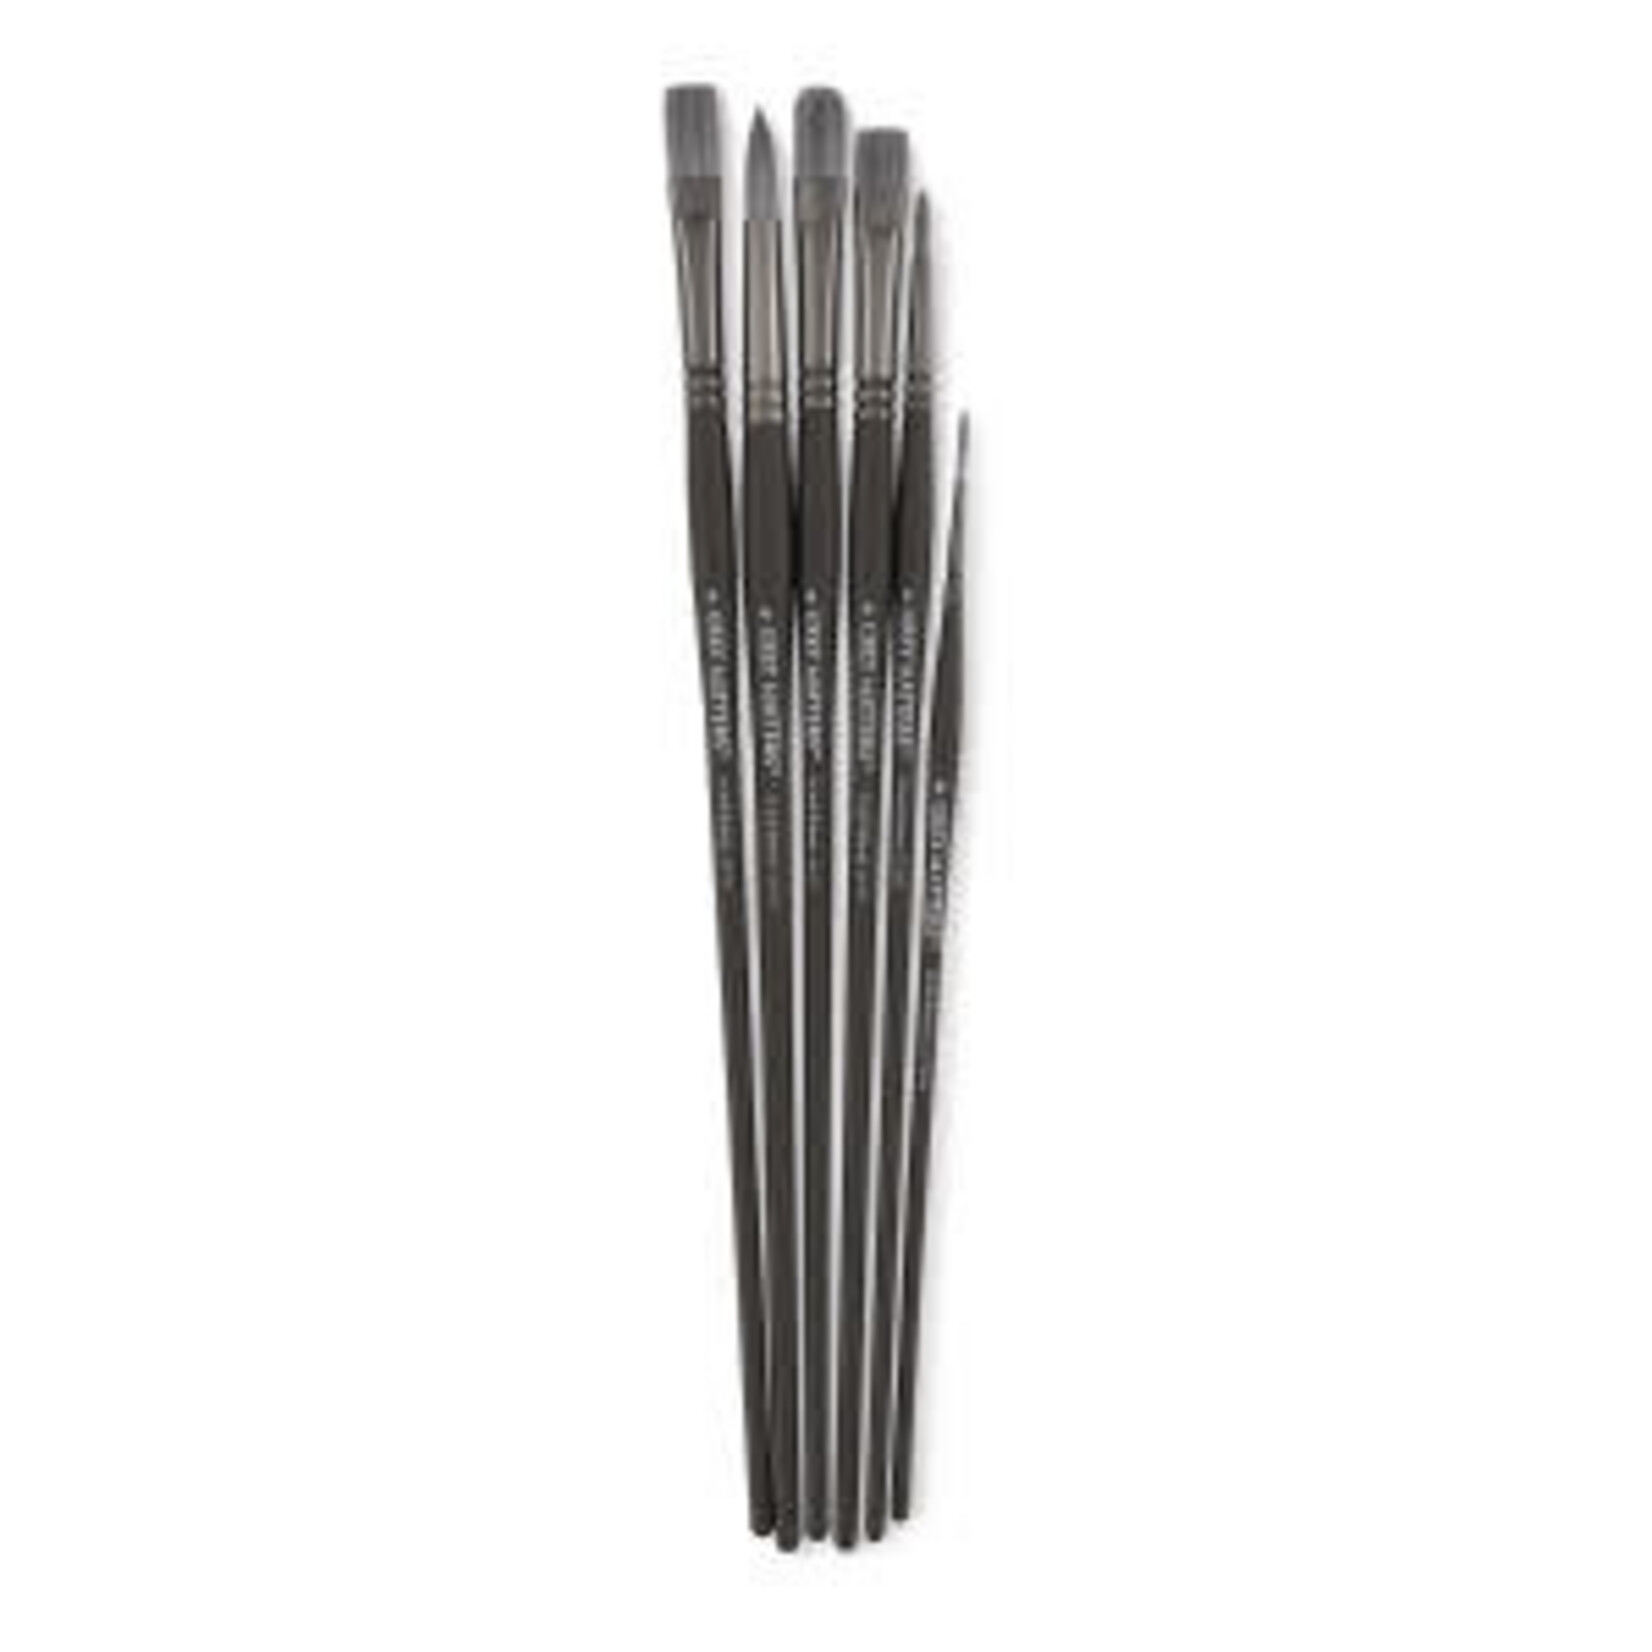 Jack Richeson Grey Matters Set 6 Oil Brushes